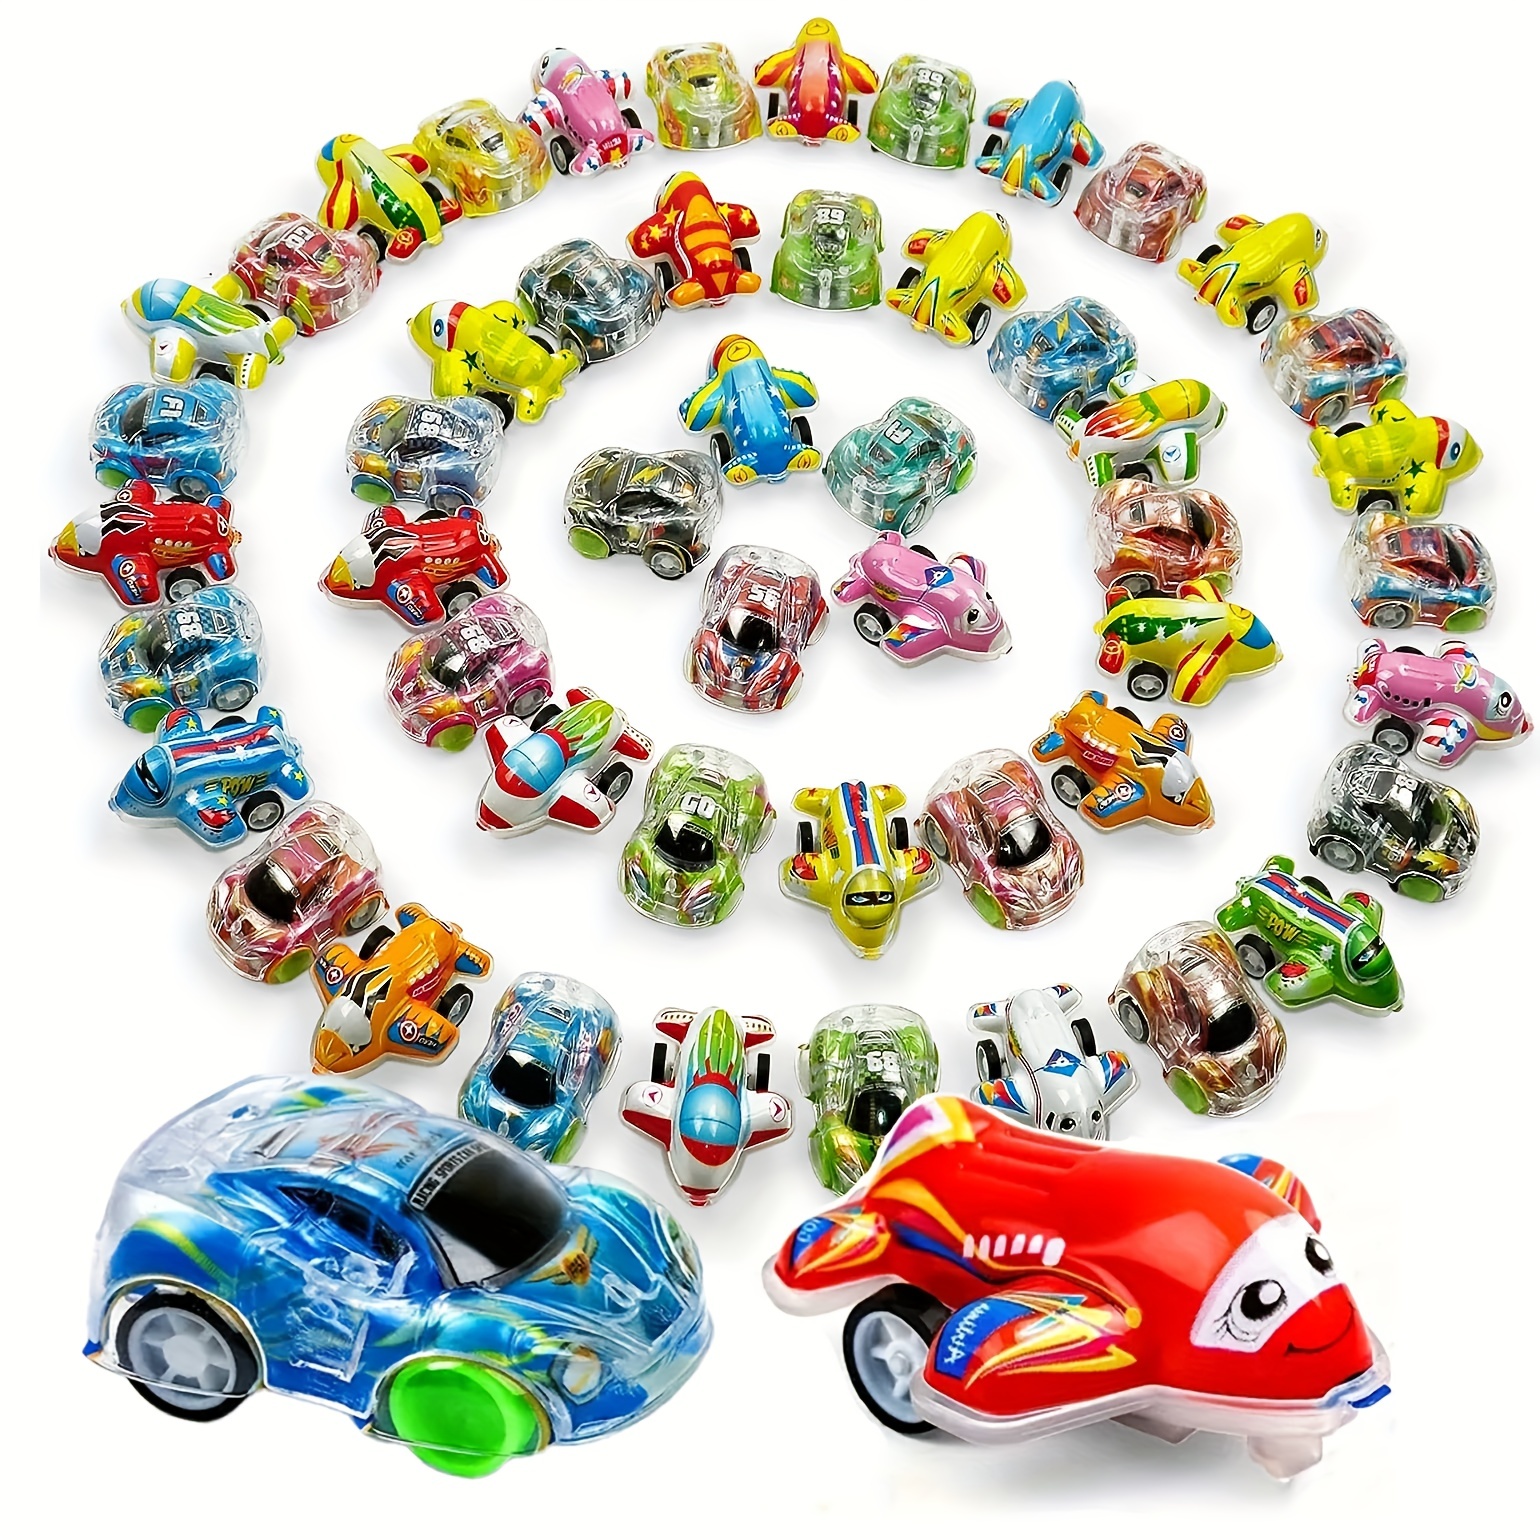 

Mini Pull-back Cars And Airplanes Come In Random Colors, With Cartoon Transparent Race Cars And Colorful Shells, Inertial Cars And Airplanes For Boys And Girls